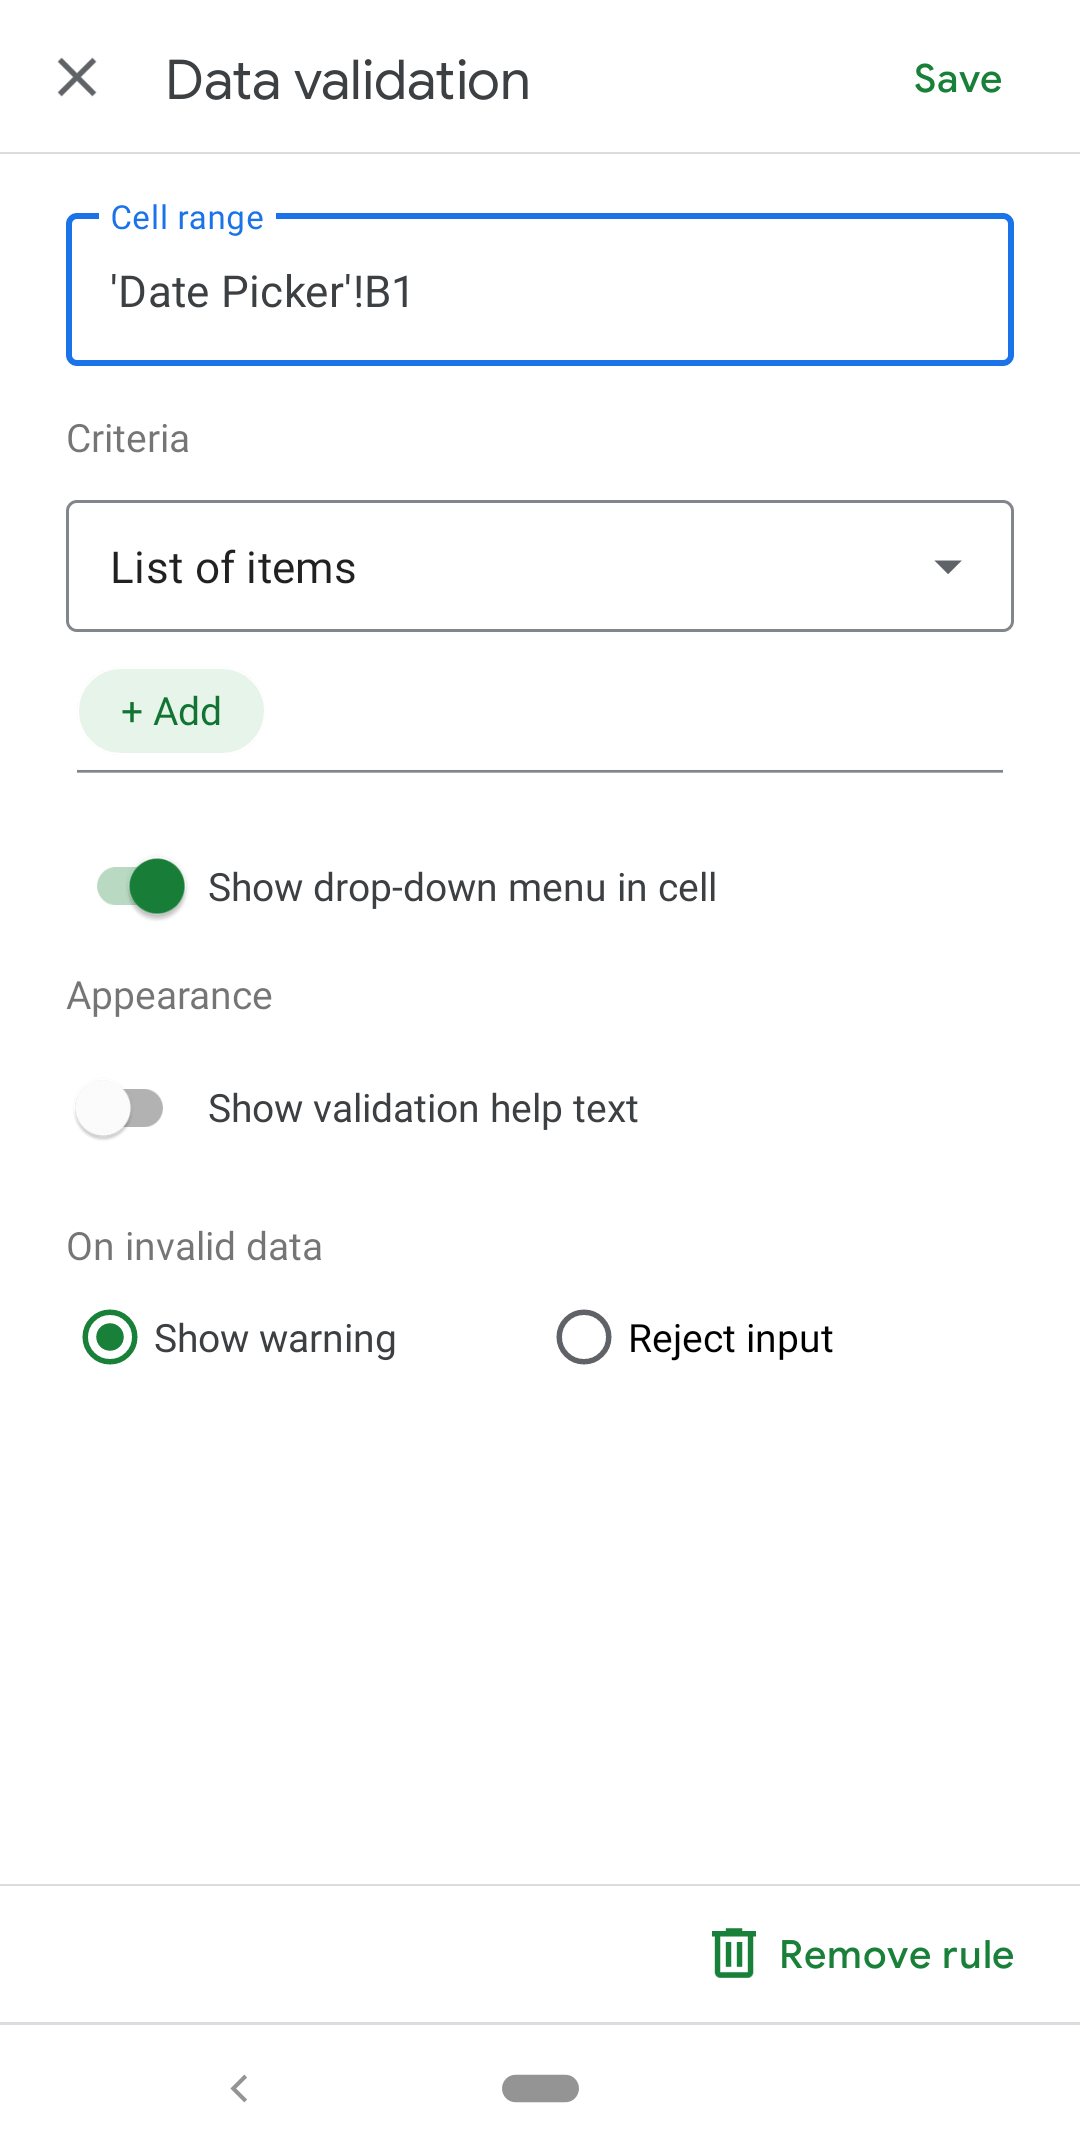 shows the default layout and options when the data validation menu is opened from a selection that had no existing rules in the android app